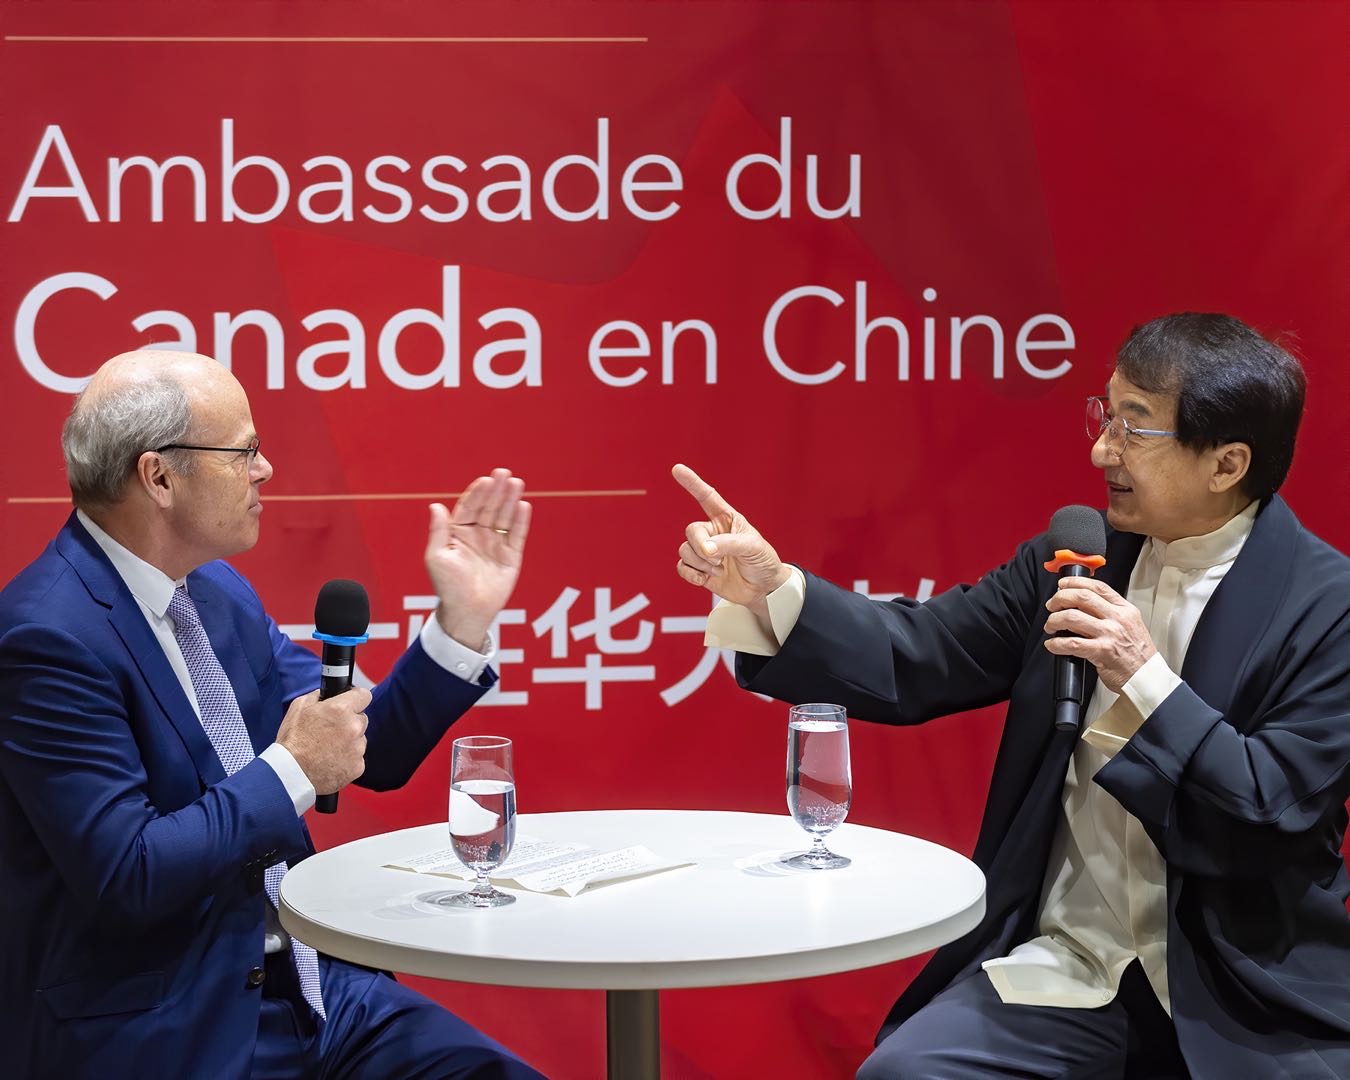 Nickel interviews (and maybe delivers a karate chop to) action adventure star Jackie Chan at the Canadian Embassy in Beijing in December 2021.